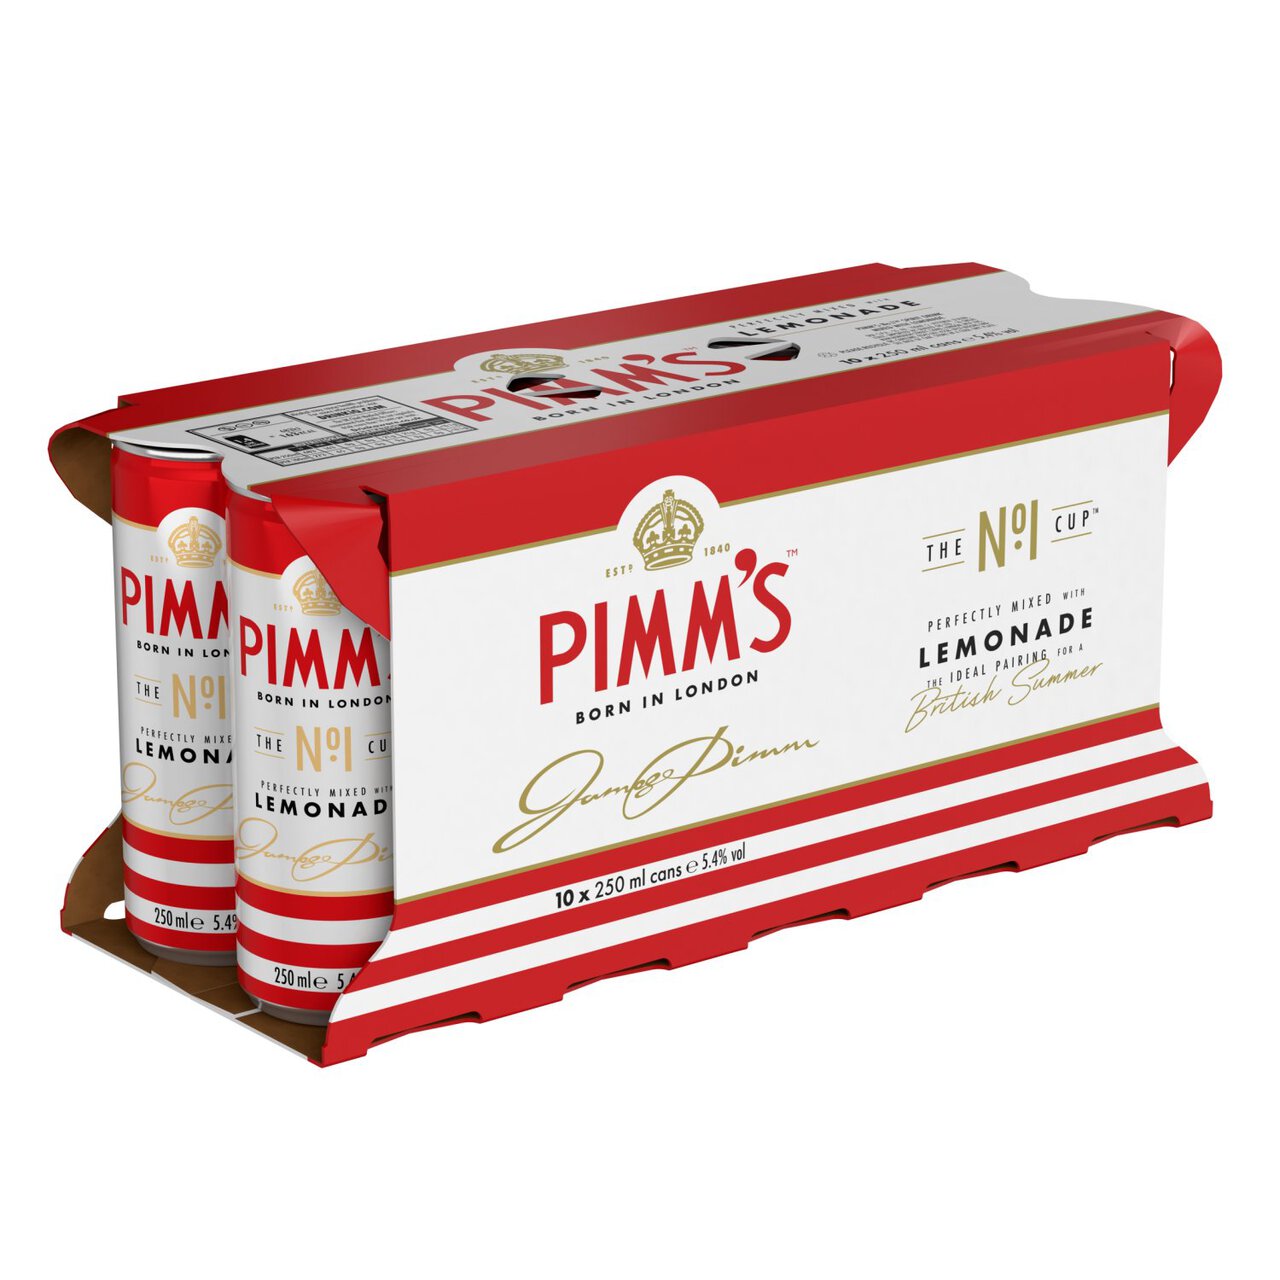 Pimm's No1 Cup and Lemonade Premix Liqueurs Ready to Drink 10 x 250ml